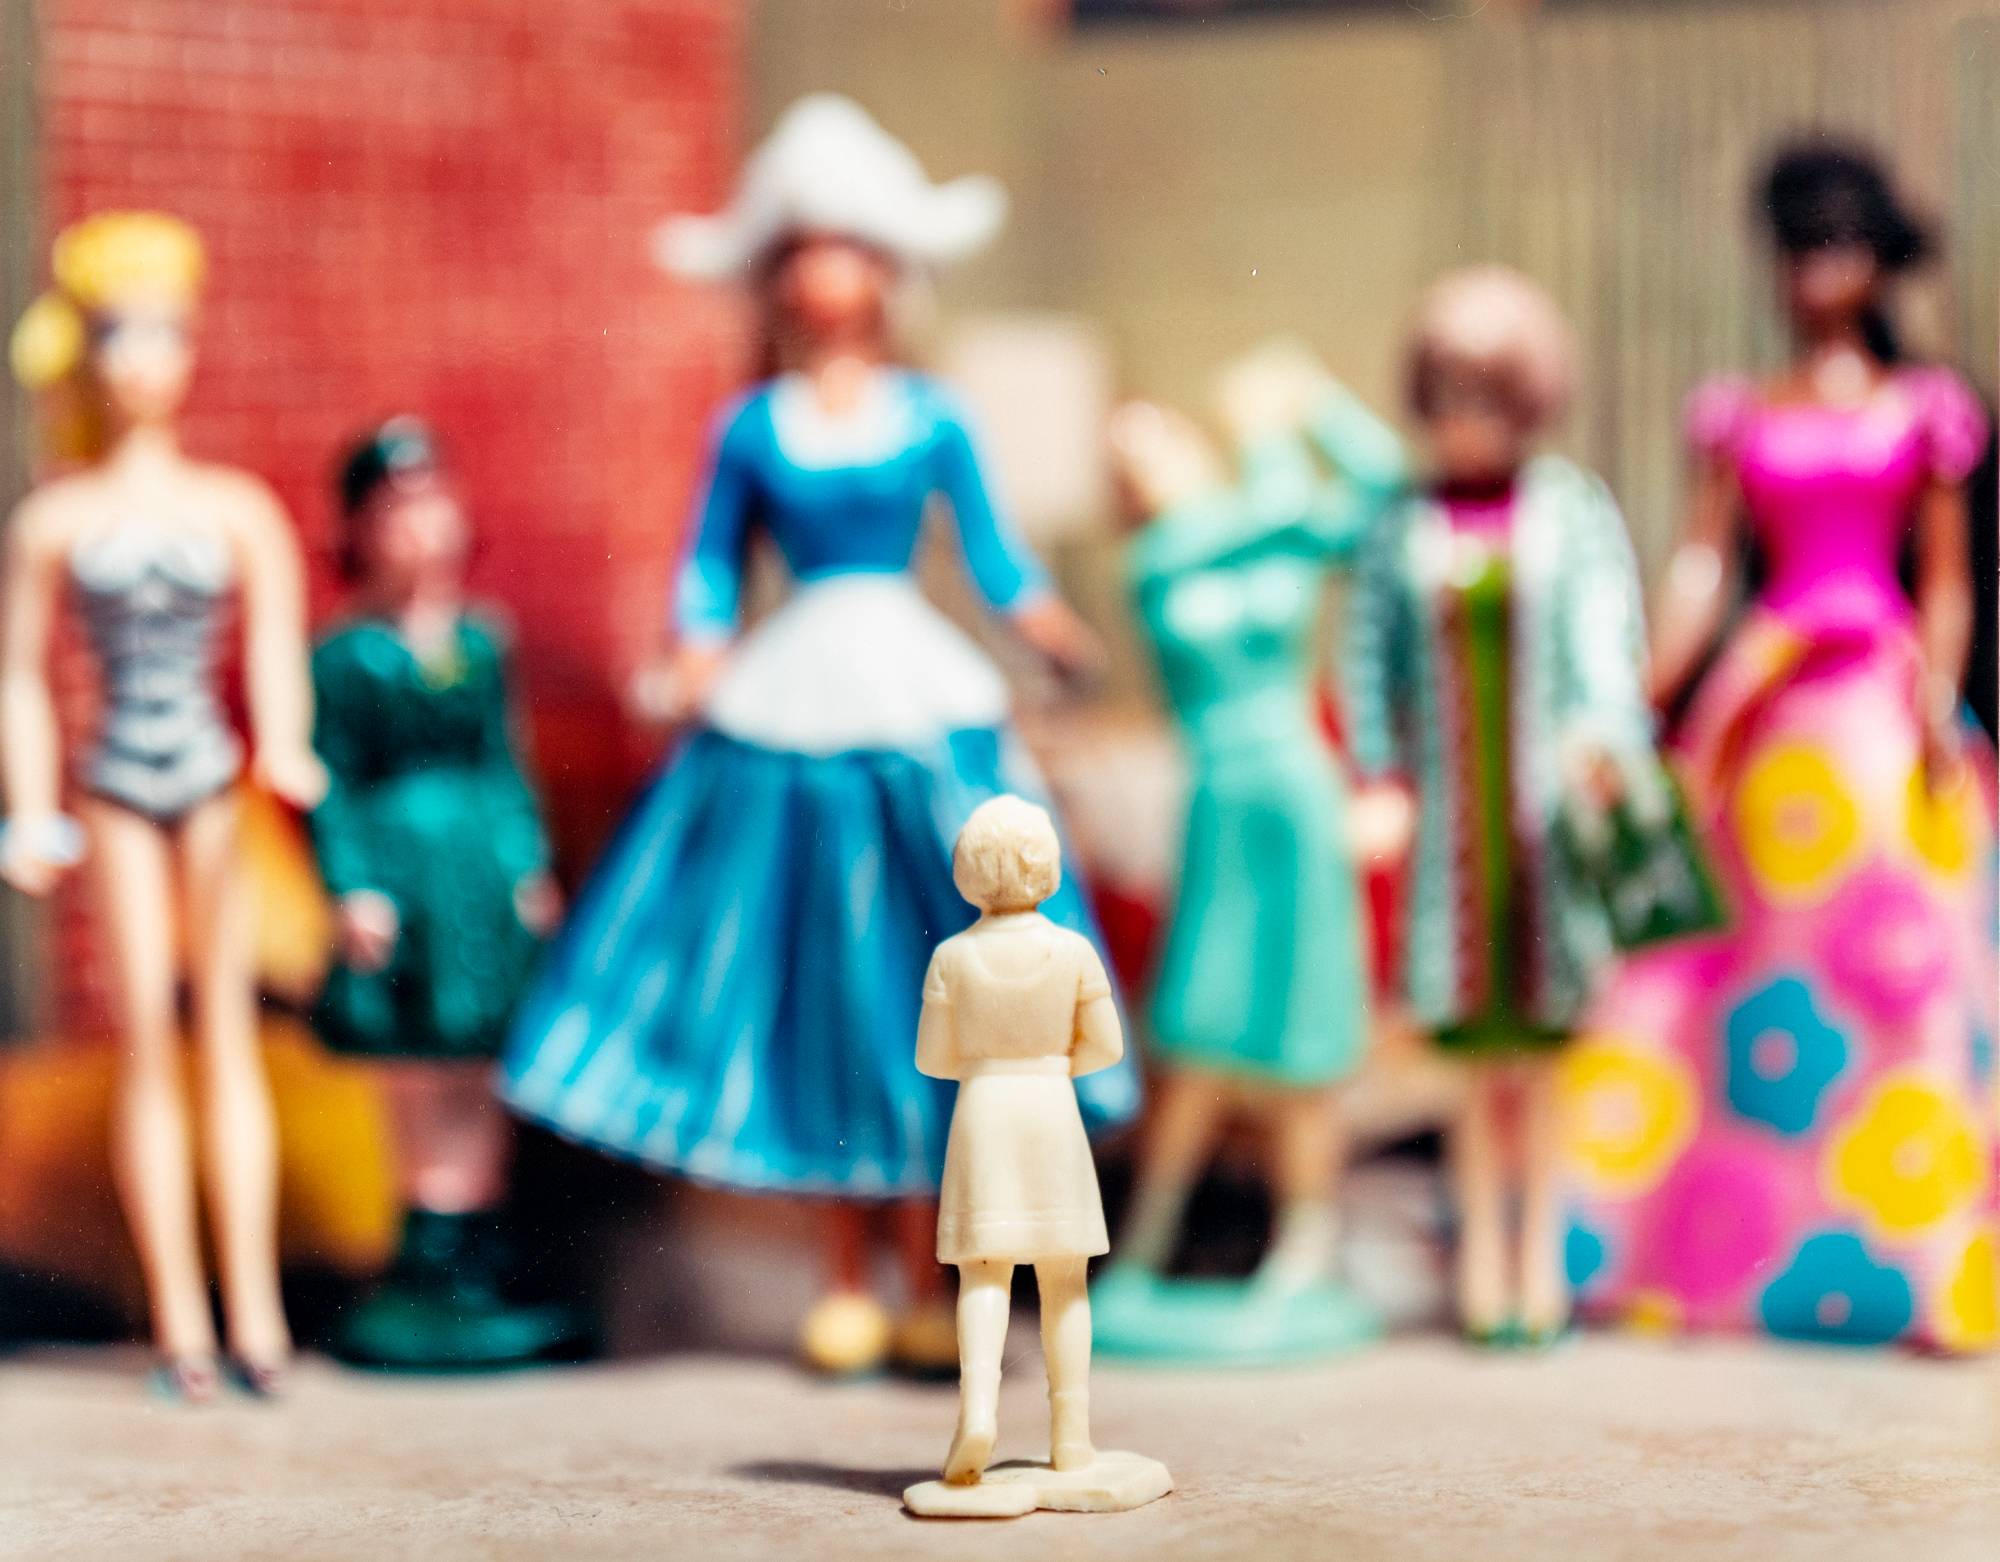 small female figurine in focus standing with back facing in front of many other female figurines in background out of focus